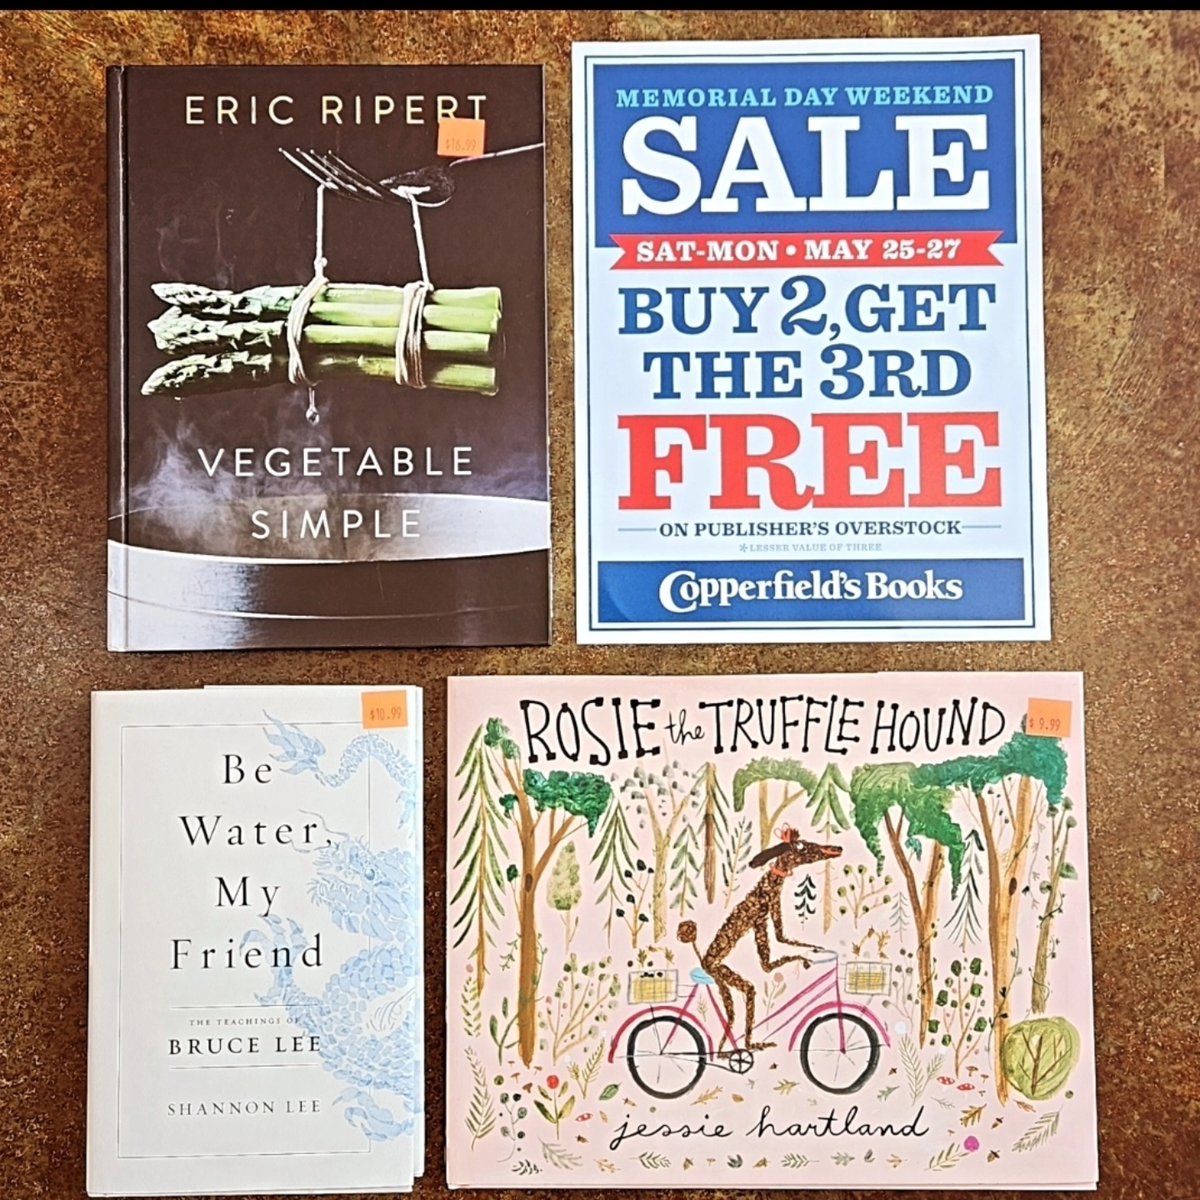 Last day to save! Join us for the end of our Memorial Day sale (5/27) and pick up some great books! #copperfieldsbooks #supportindiebookstores💛#memorialdaysale @montgomeryvillageca @marincountrymart @downtownnovato @golocalsoco